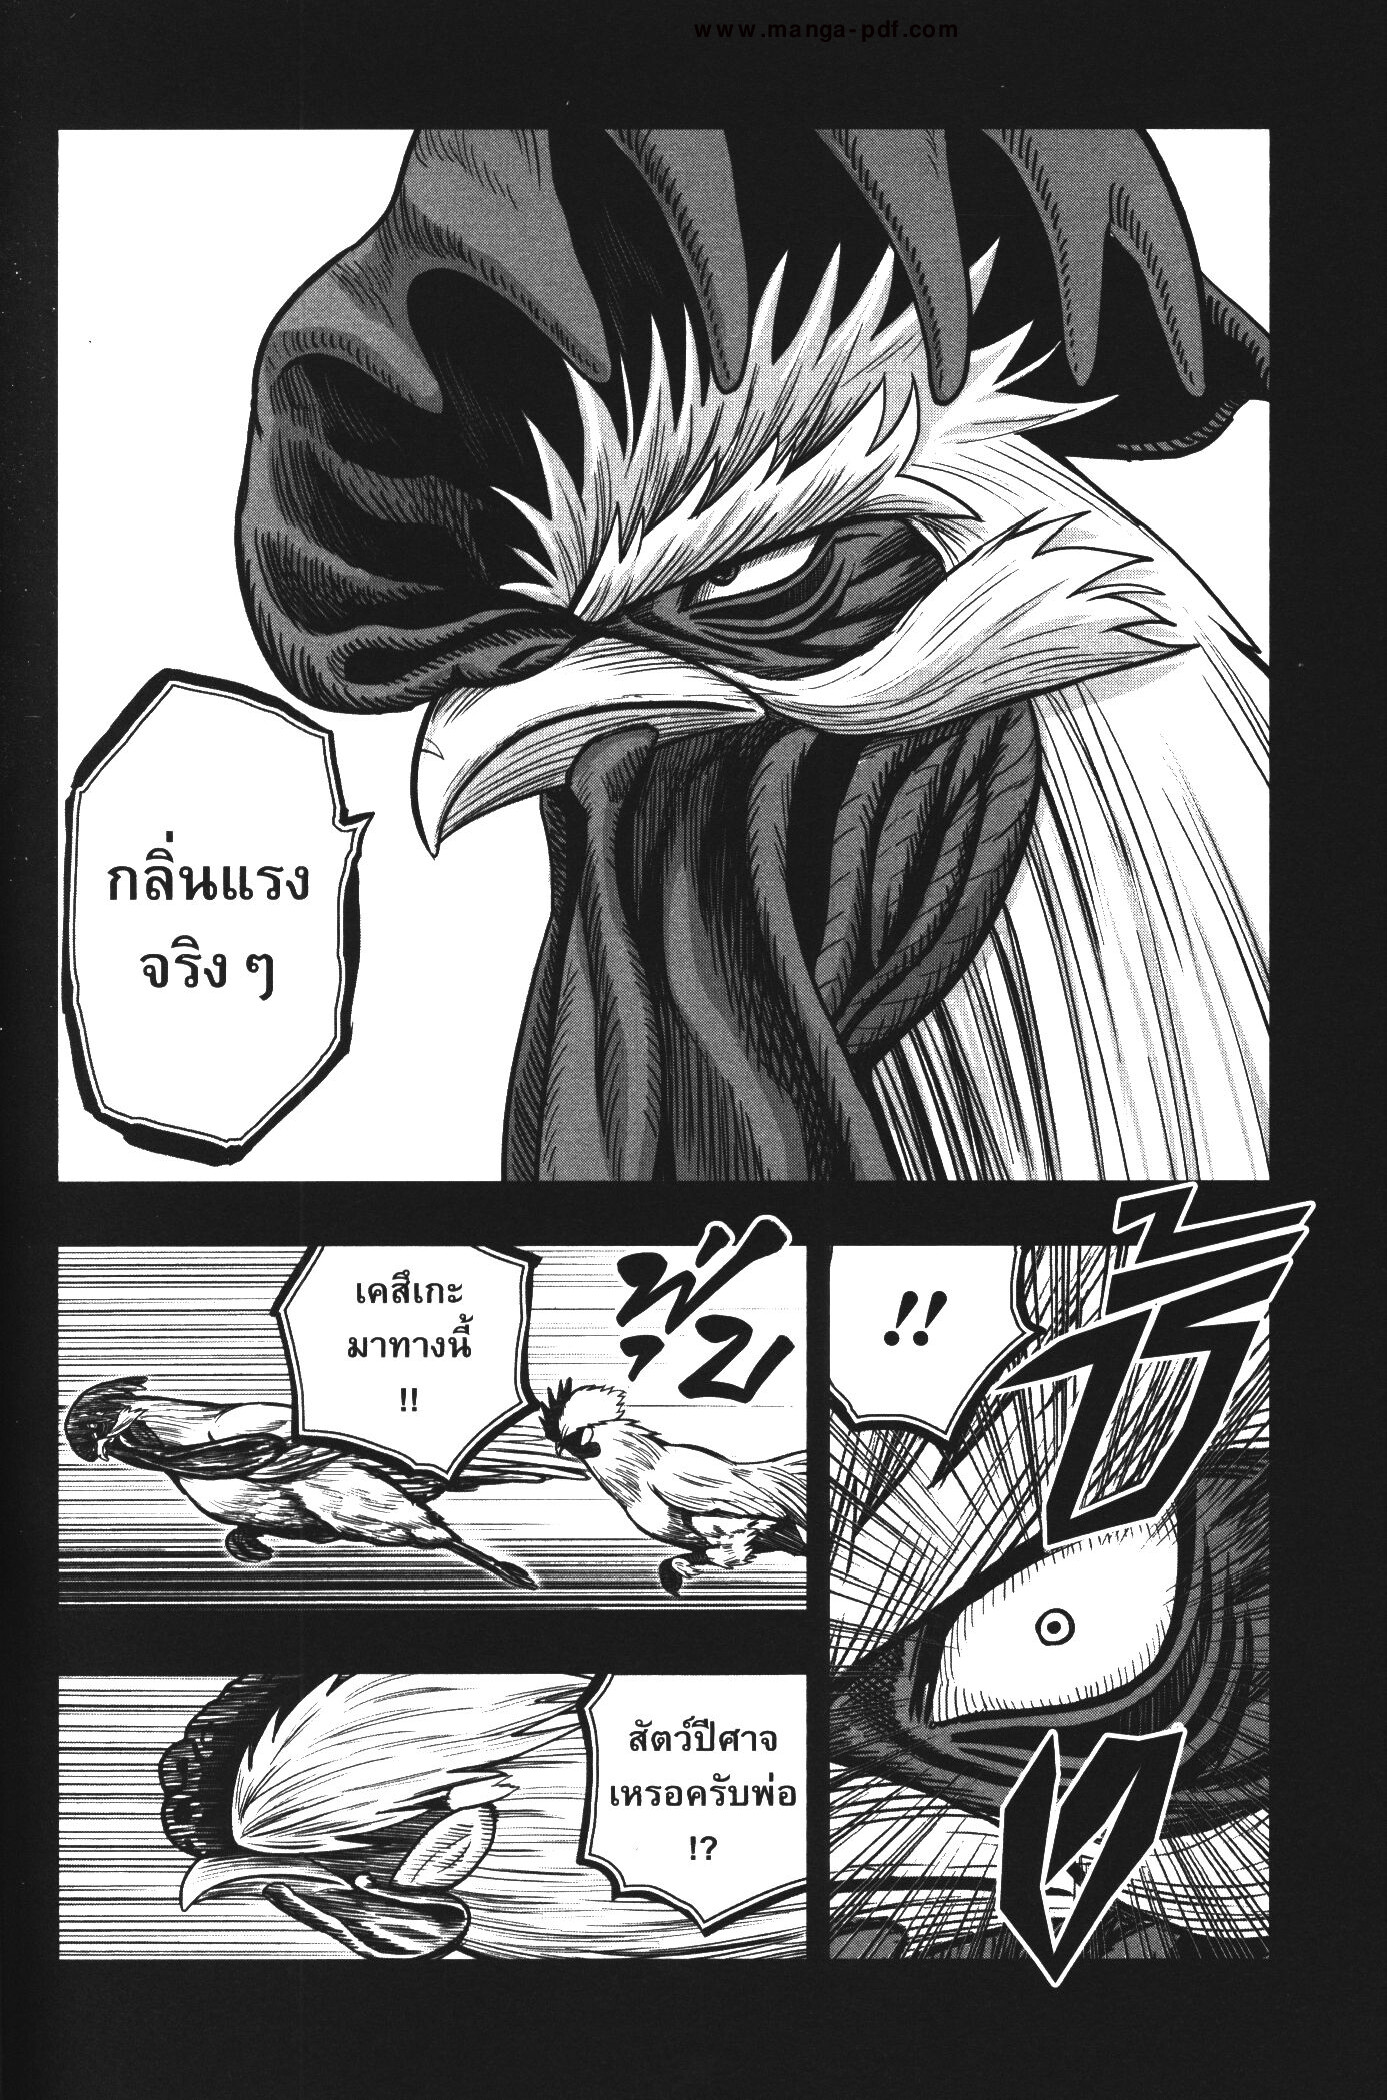 Rooster Fighter 20 (16)